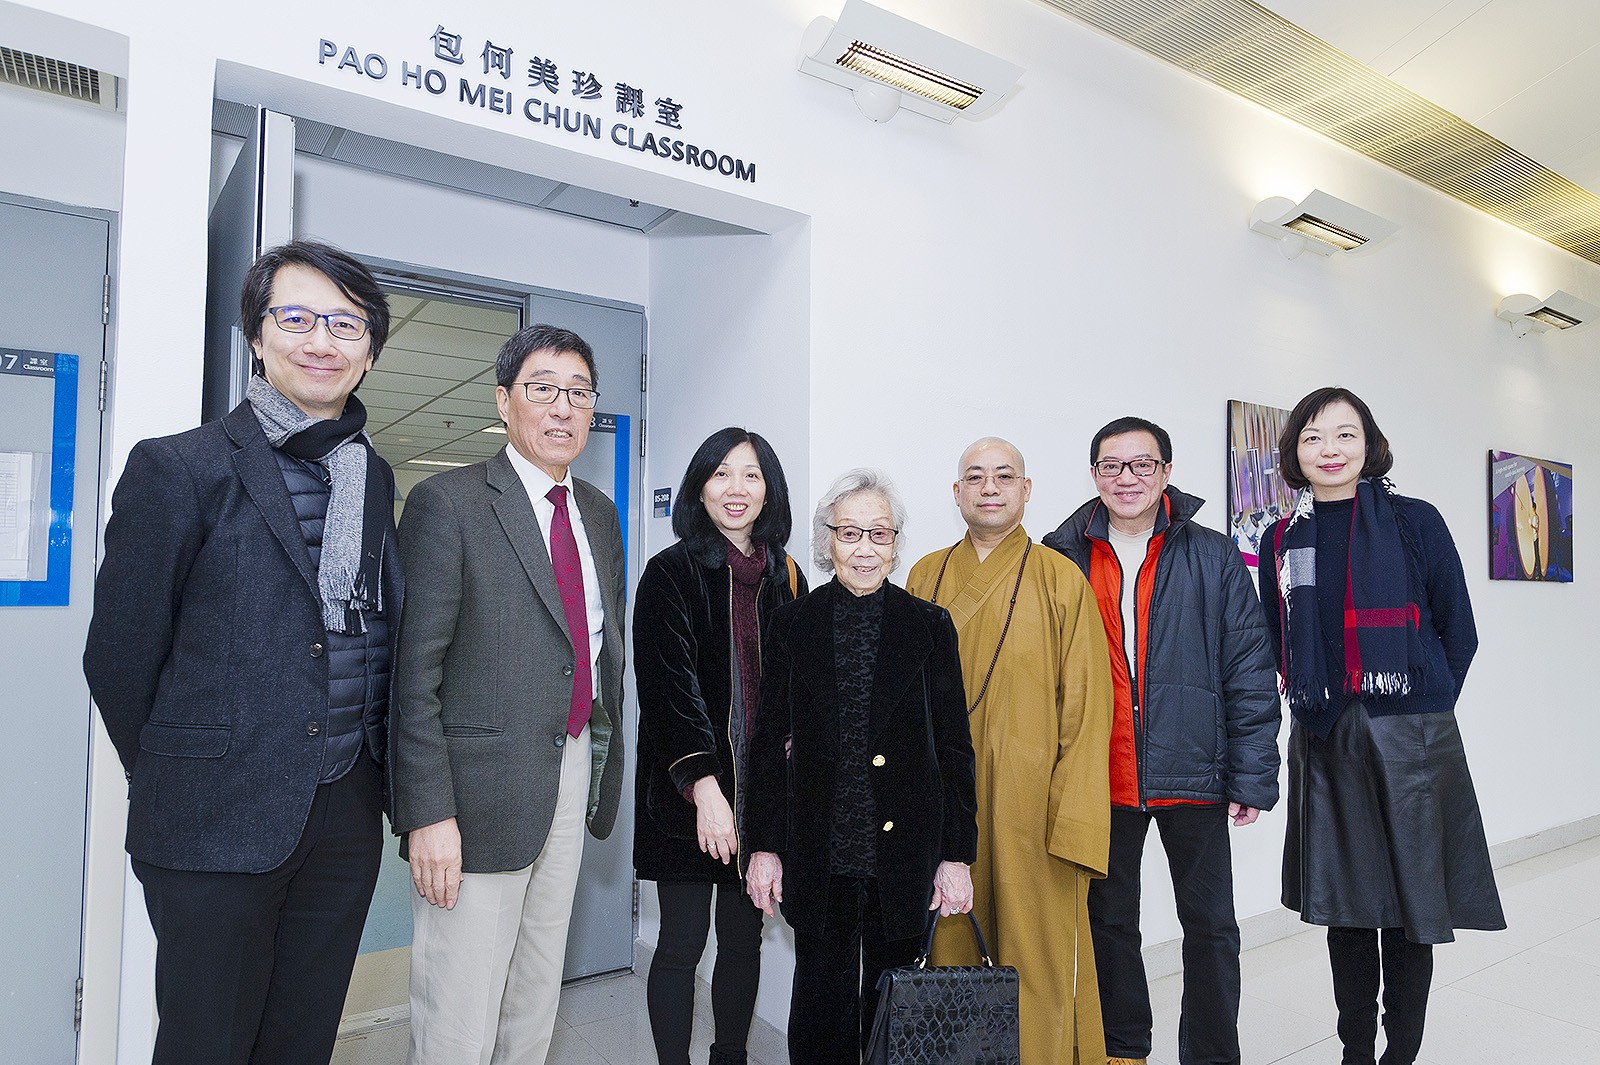 In appreciation of the generous support of Mrs Pao Ho Mei-chun (middle), Classroom B5-208 in Yeung King Man Academic Building has been named the “Pao Ho Mei Chun Classroom”. 